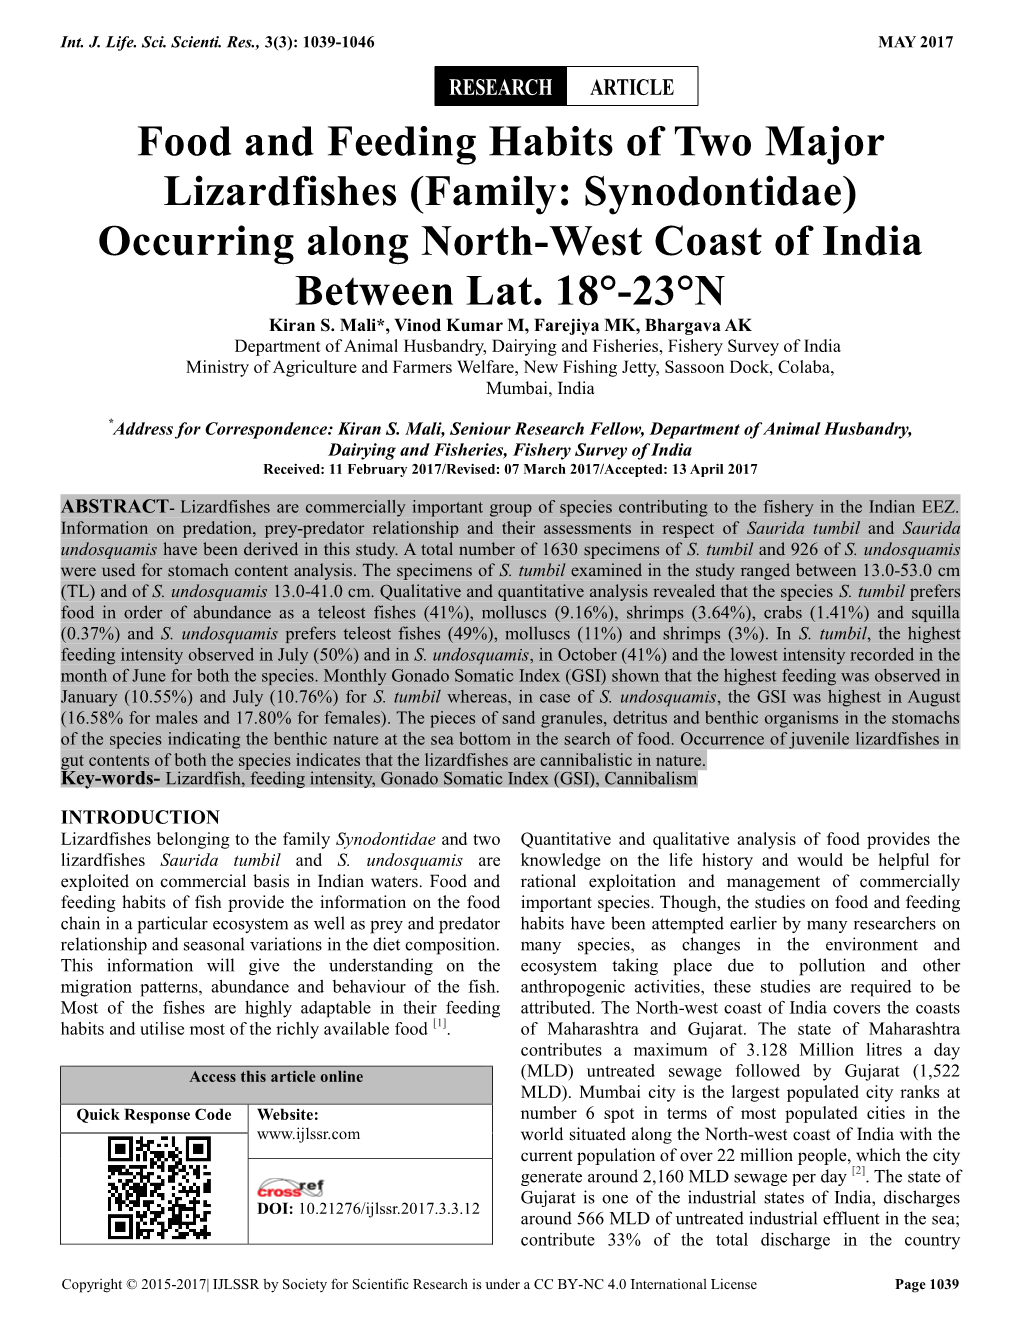 Food and Feeding Habits of Two Major Lizardfishes (Family: Synodontidae) Occurring Along North-West Coast of India Between Lat